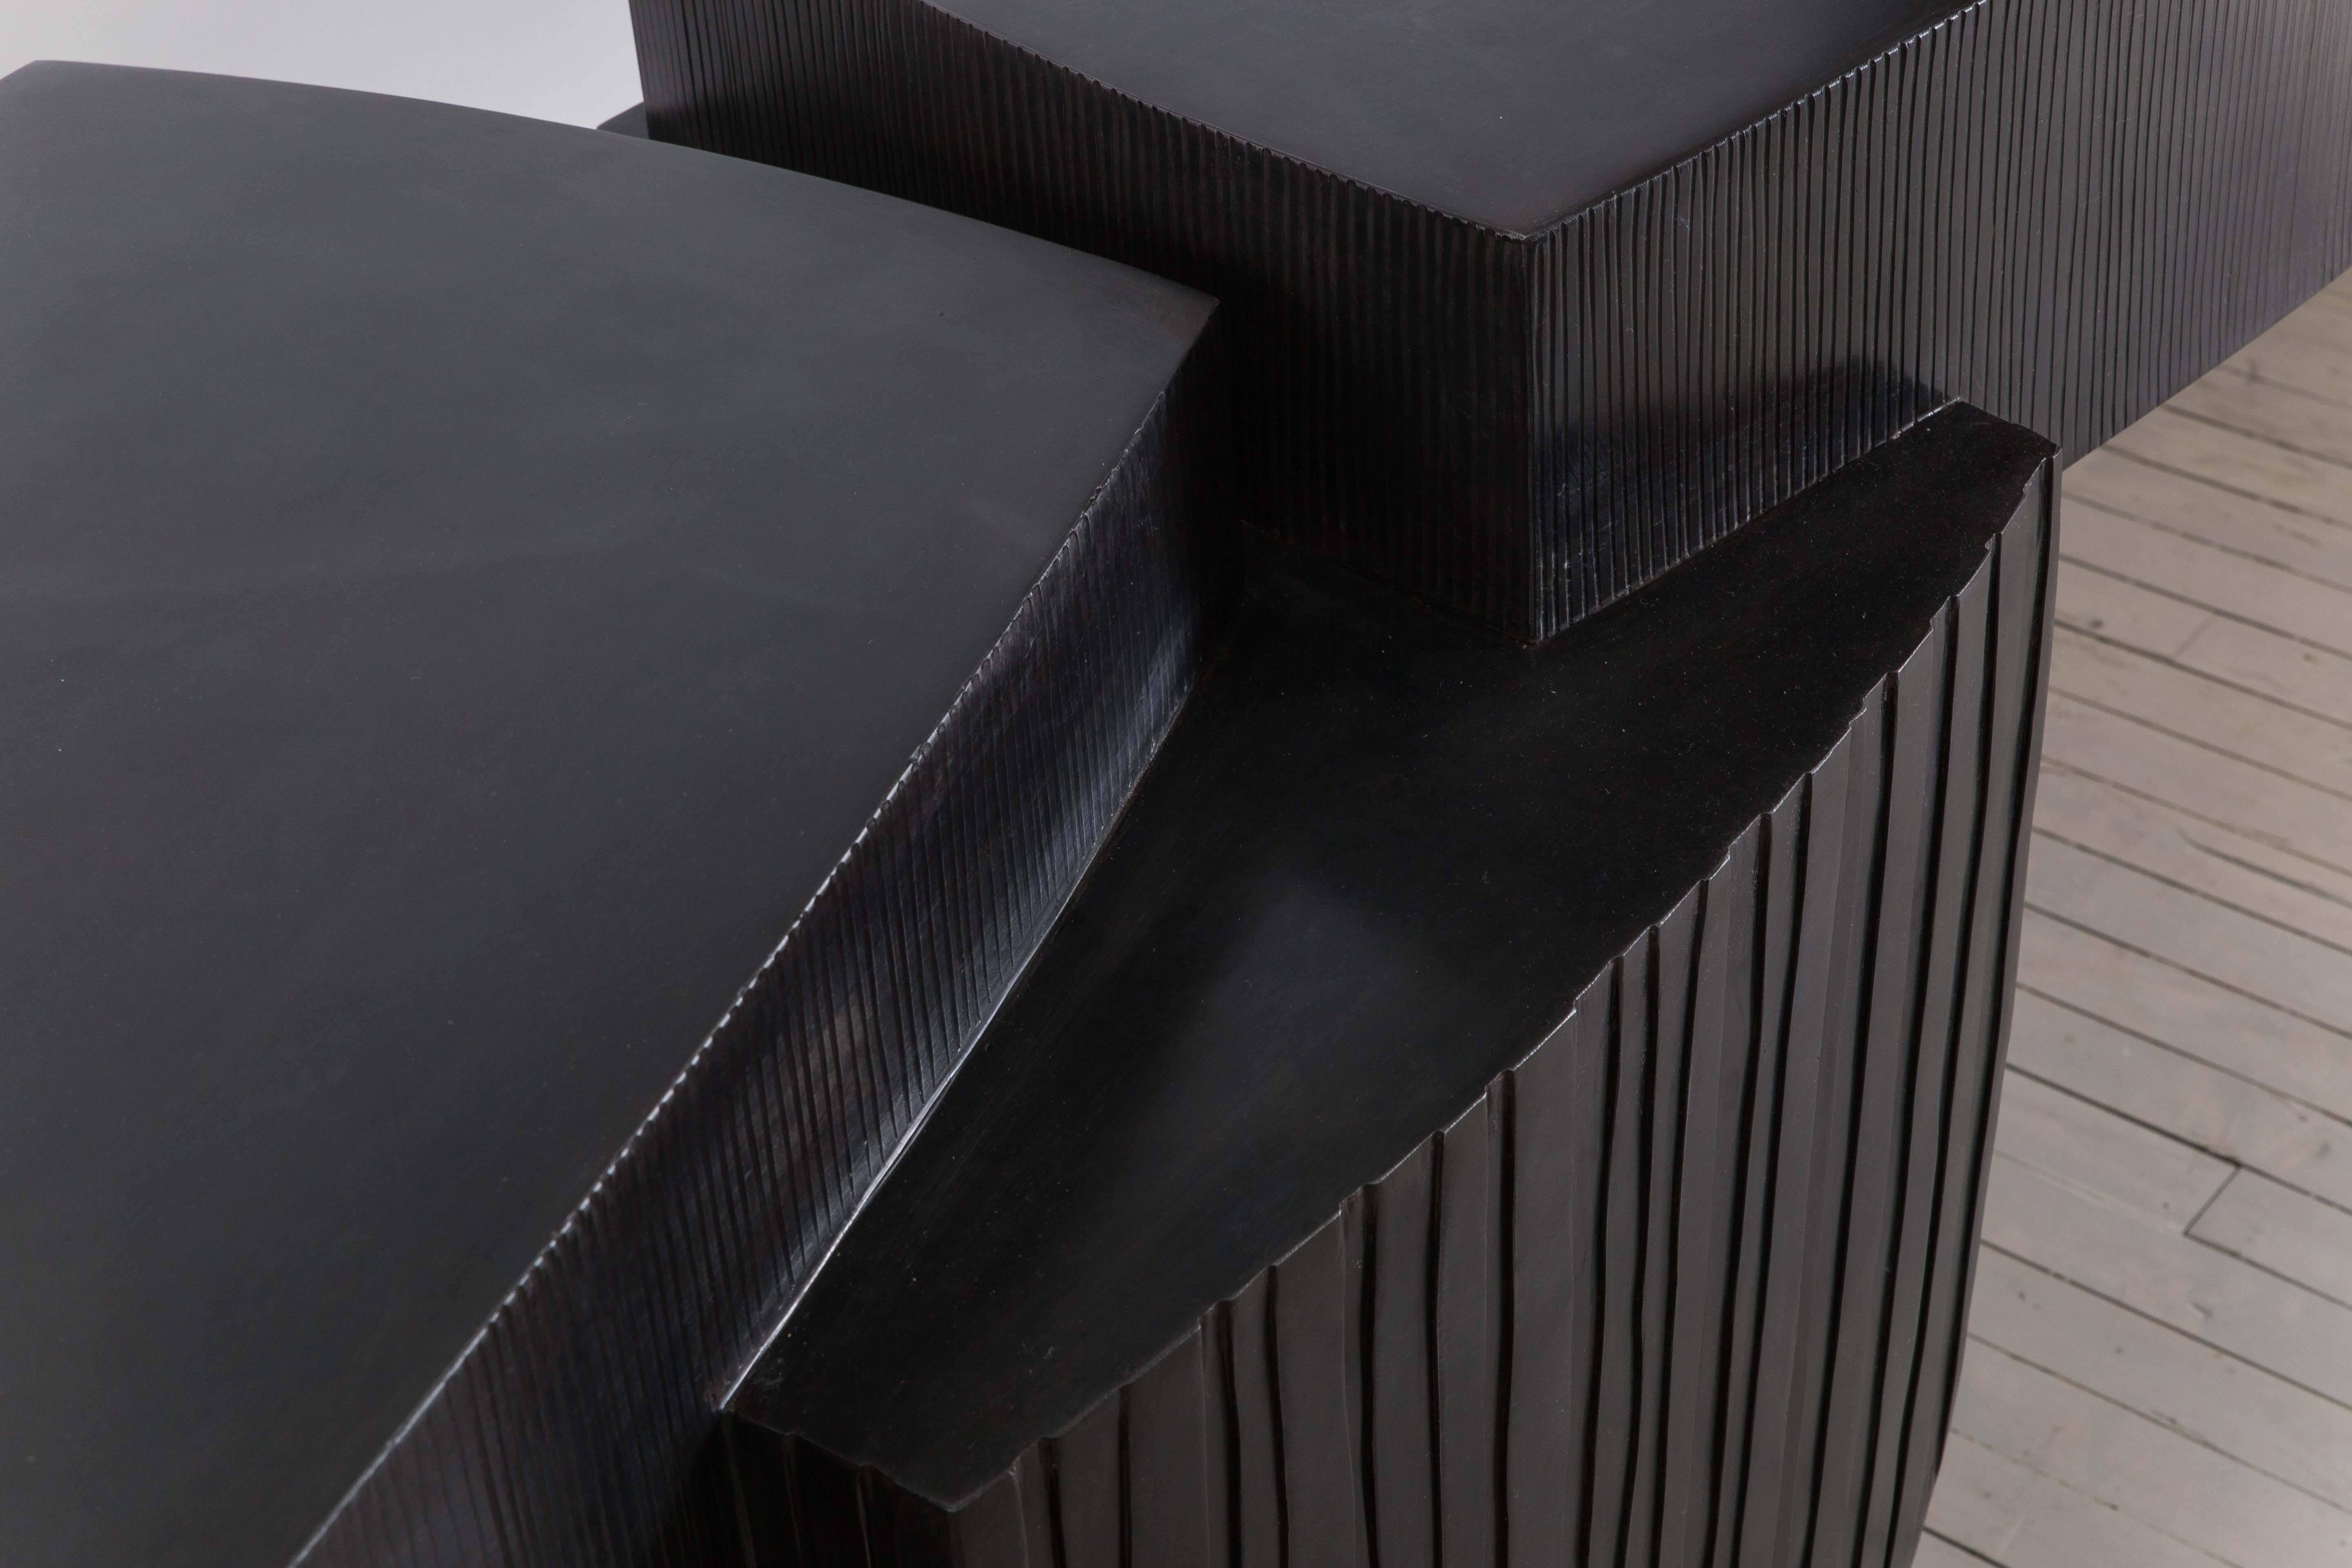 Gary Magakis’ unique blackened steel ledges console epitomizes the sculptor’s distinct approach to creating bold and dense geometric forms that simultaneously exude an elegant, buoyant aesthetic of Modernism. At once a functional console table and